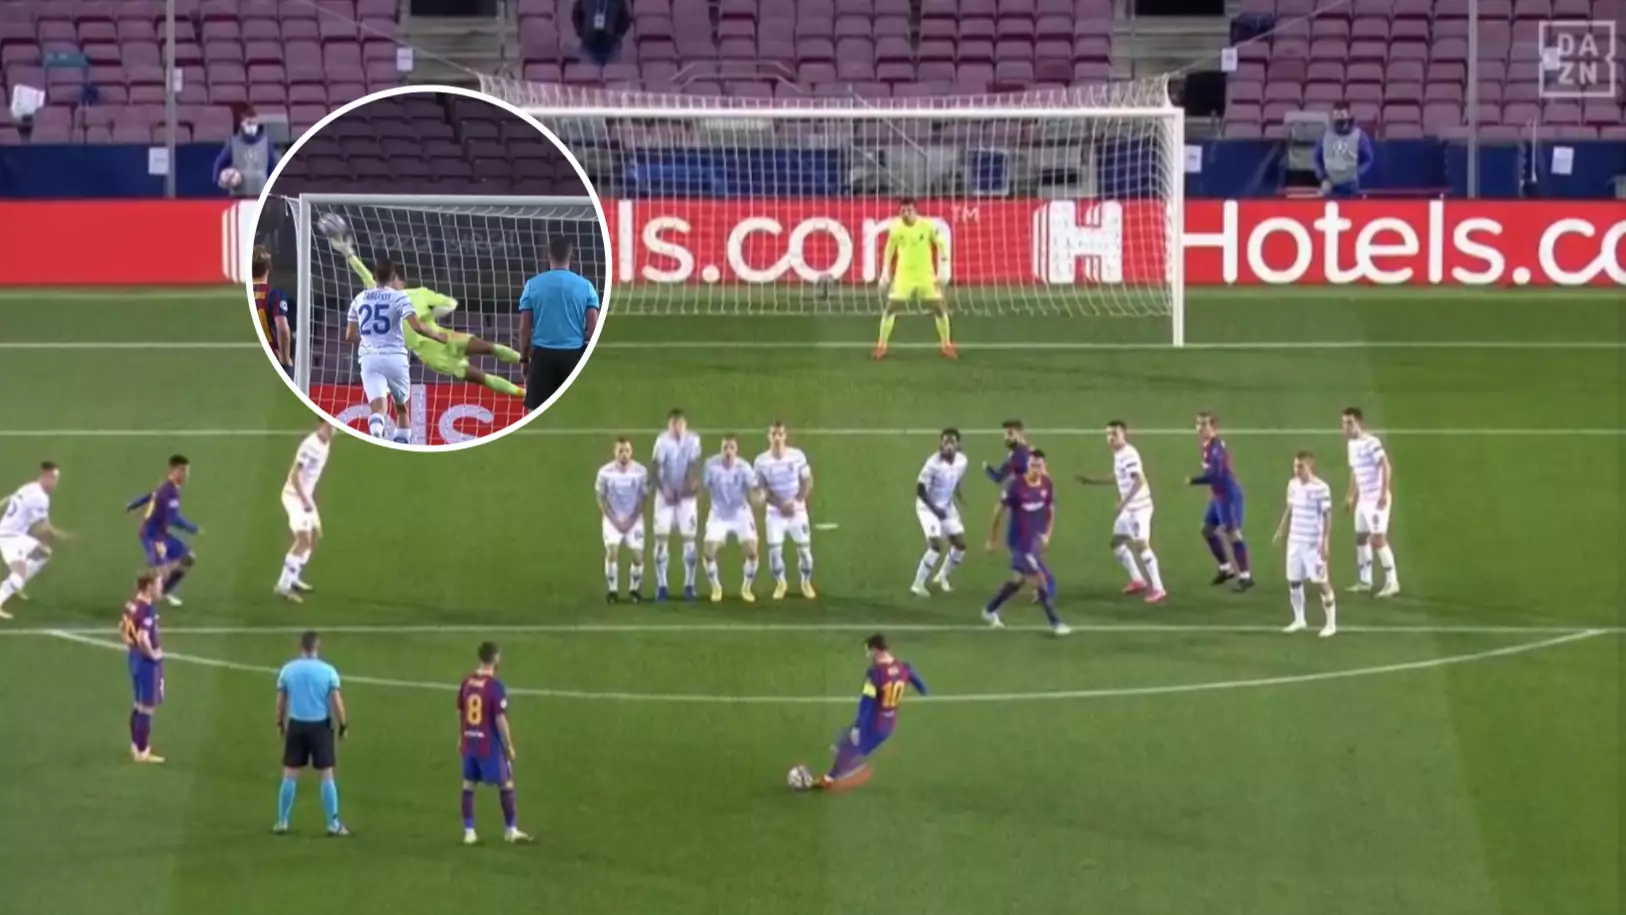 18-Year-Old Dynamo Kyiv Goalkeeper Made Stunning Save From Lionel Messi Free-Kick On Champions League Debut